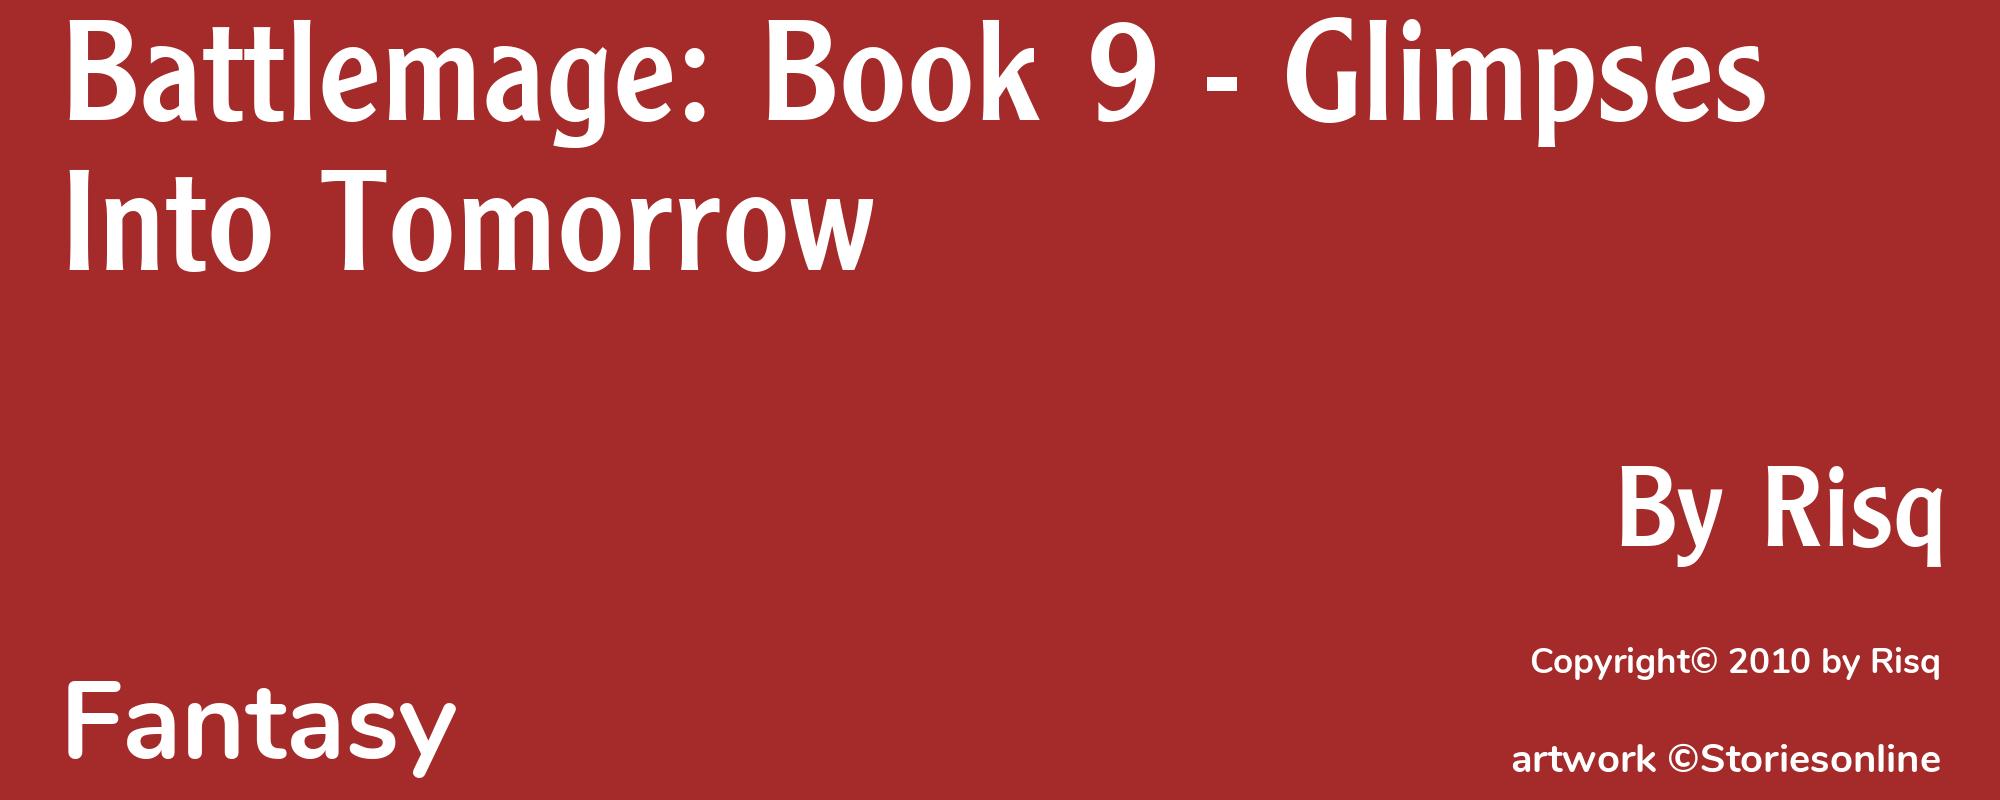 Battlemage: Book 9 - Glimpses Into Tomorrow - Cover